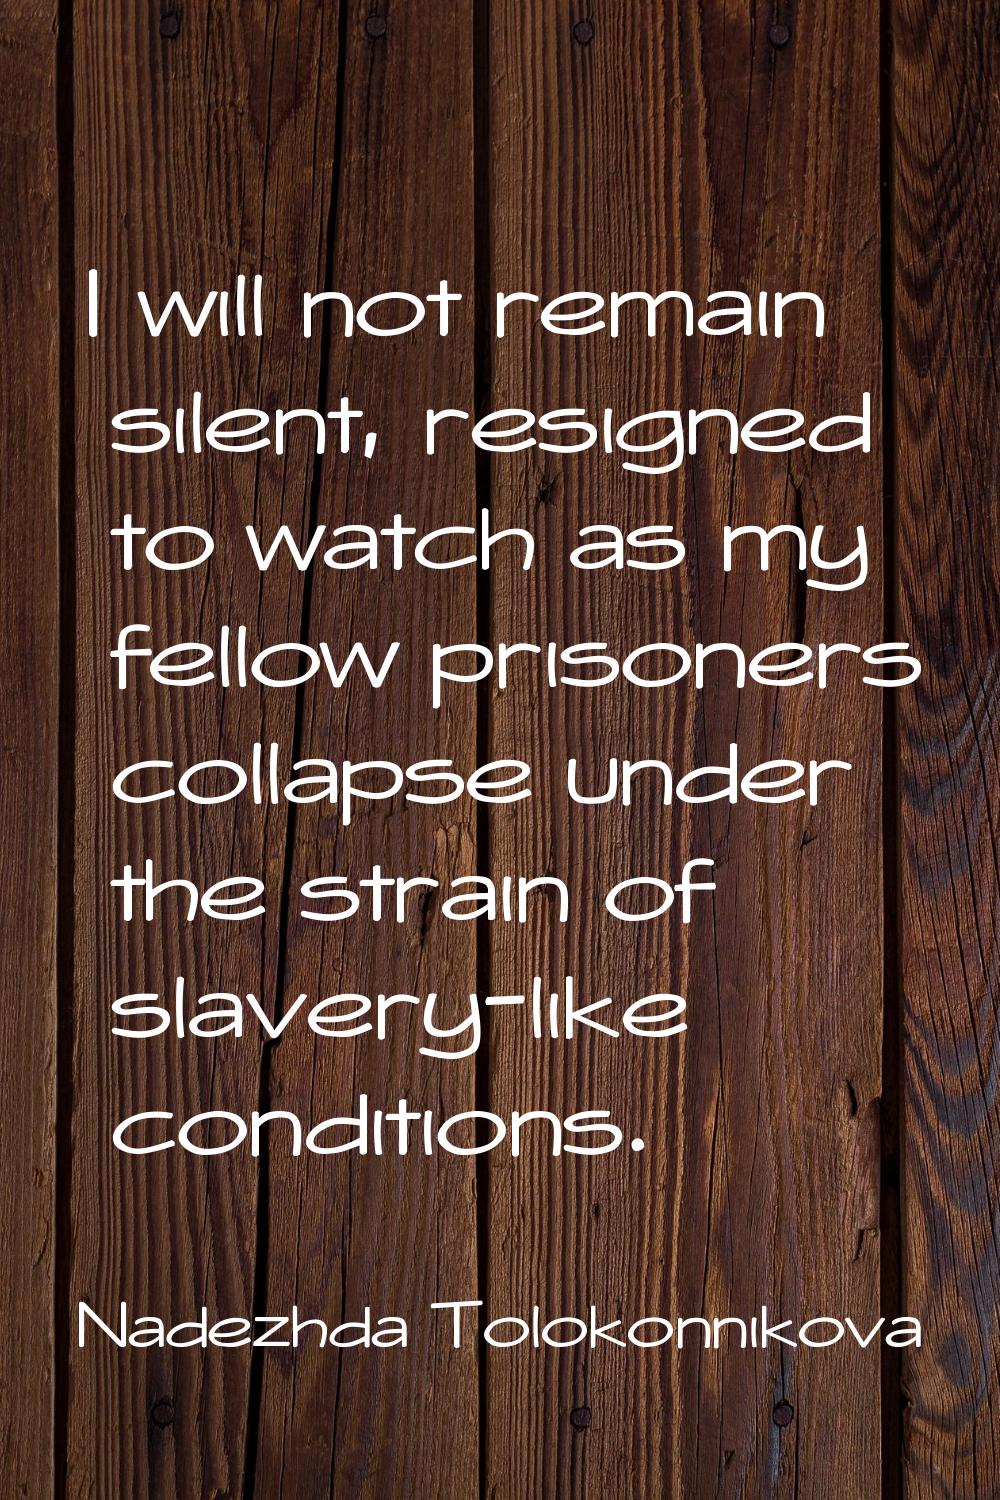 I will not remain silent, resigned to watch as my fellow prisoners collapse under the strain of sla